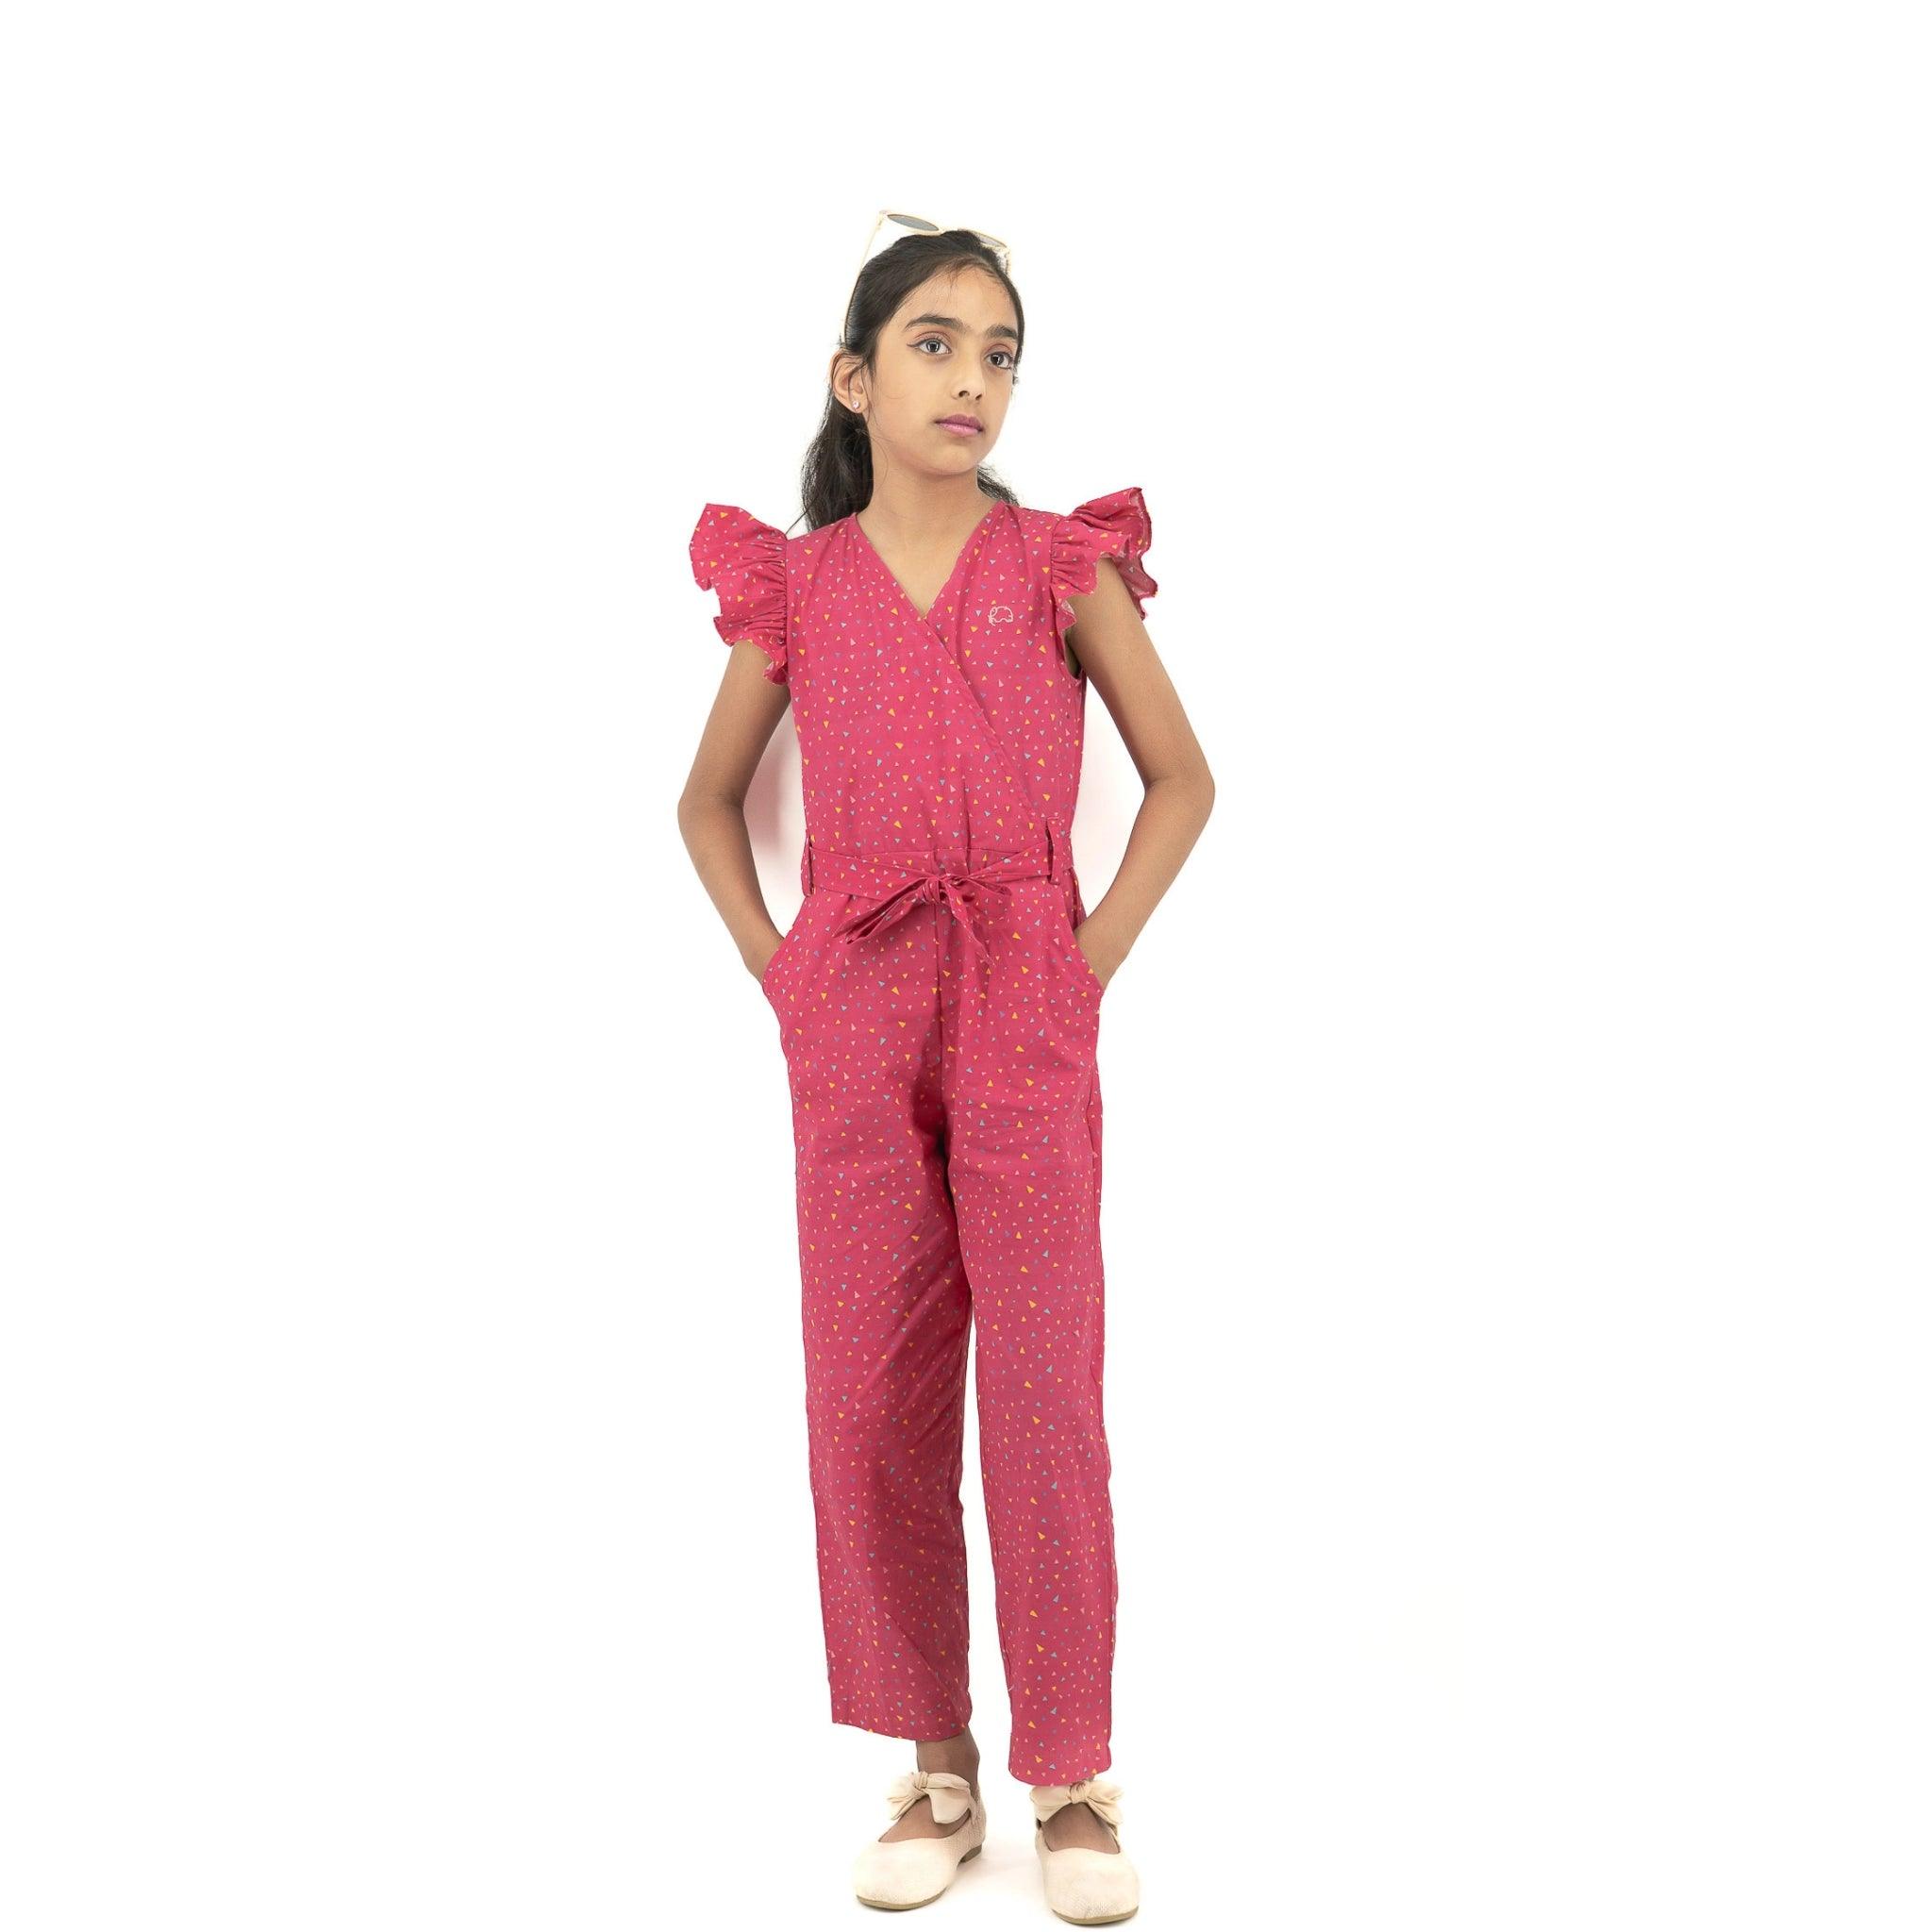 Young girl in a Red Rose cotton jumpsuit for girls by Karee, with ruffled sleeves, standing with hands on hips and looking to the side, against a white background.